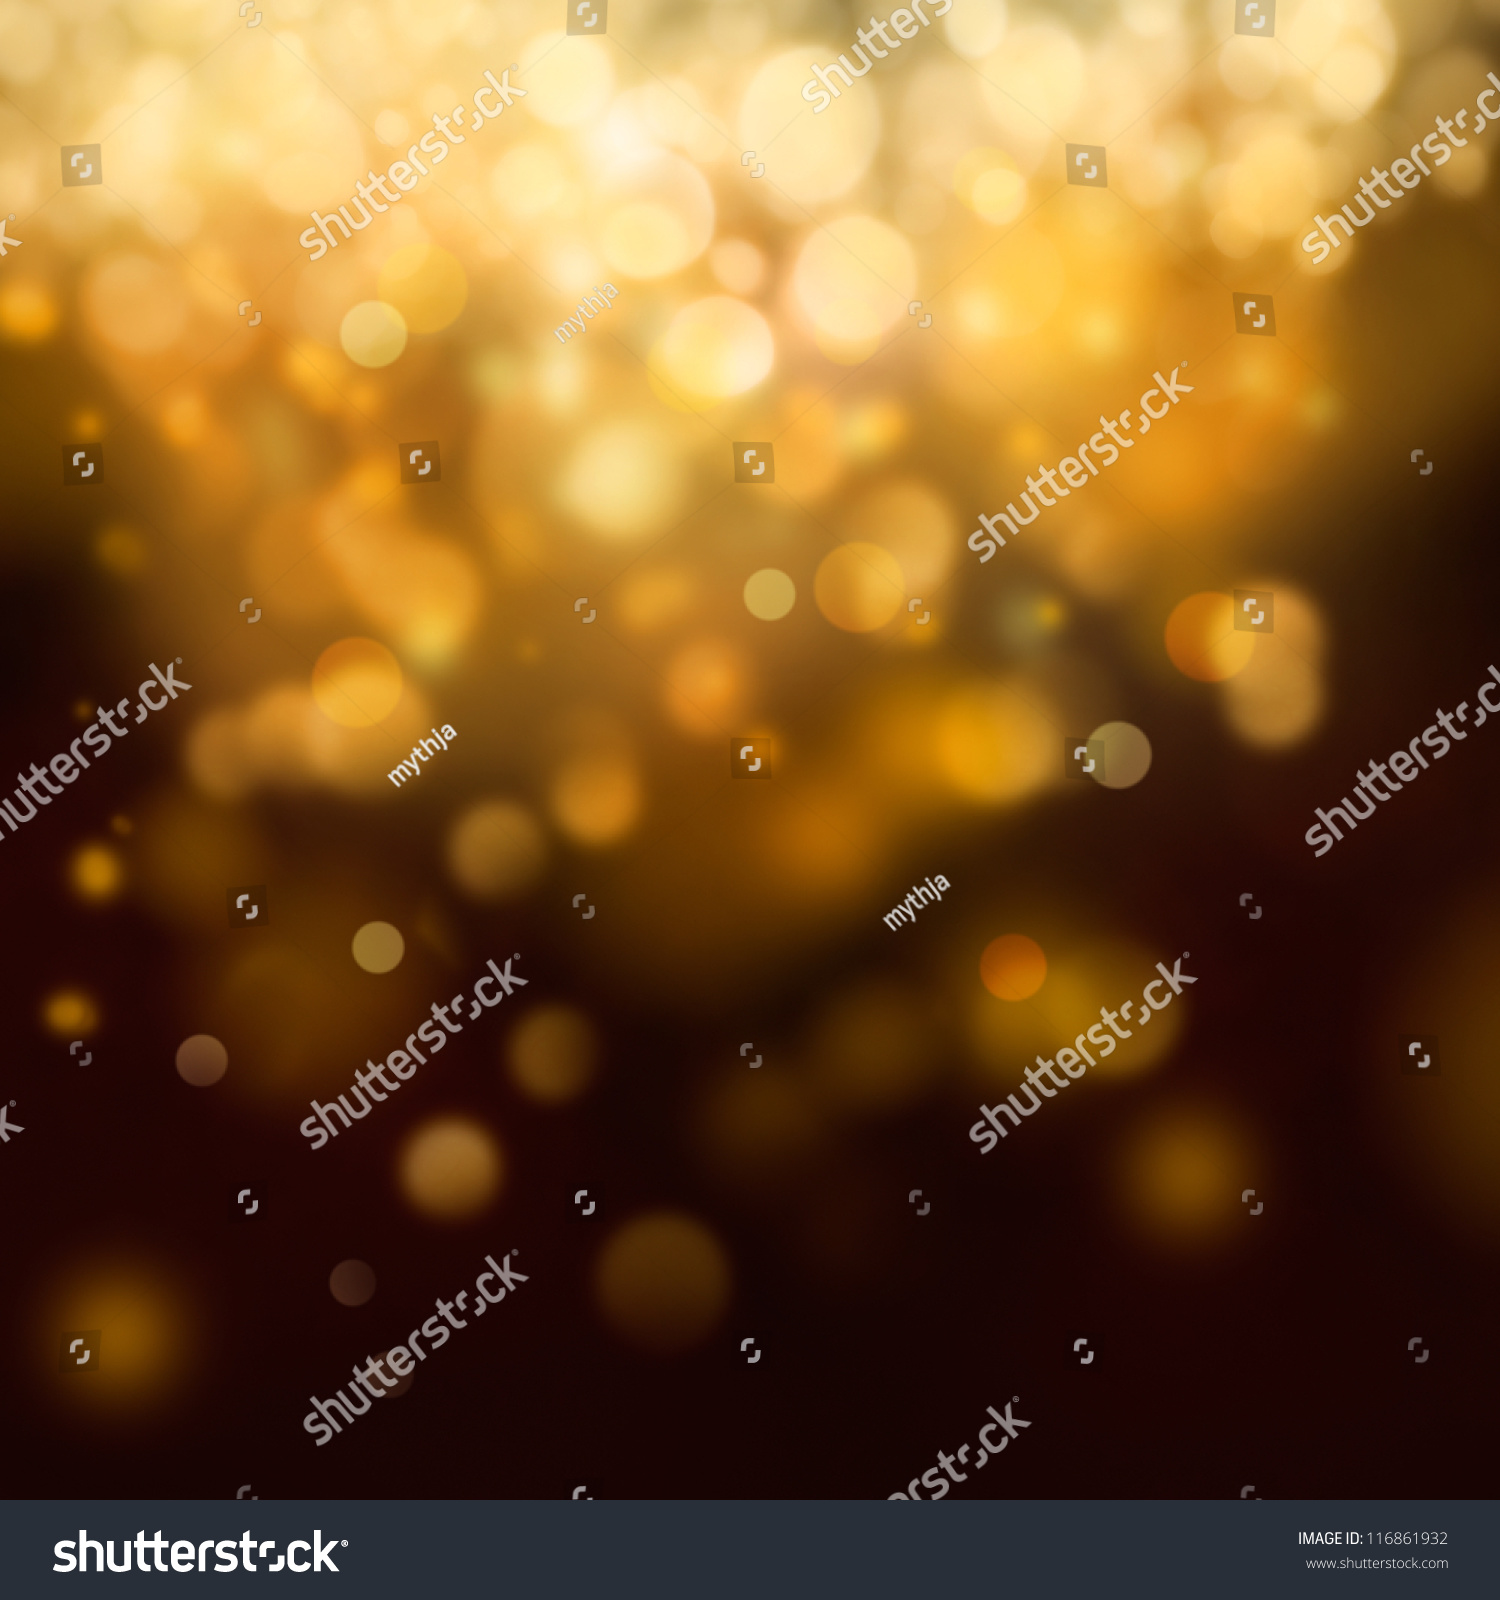 Christmas background. Festive abstract background with bokeh defocused lights and stars #116861932